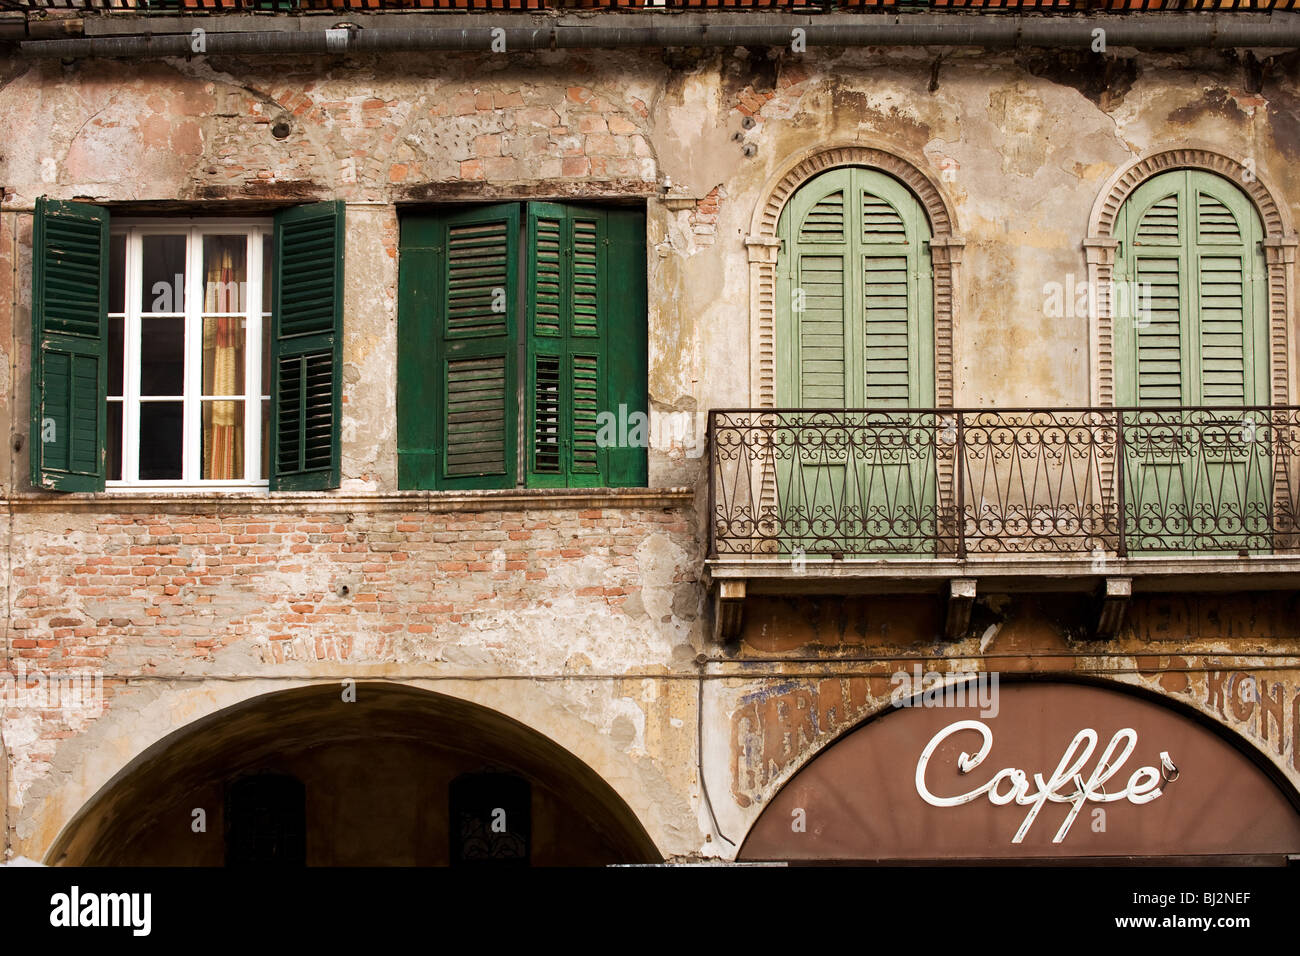 Facade of old building with Caffe sign in historical part of Verona, Italy Stock Photo